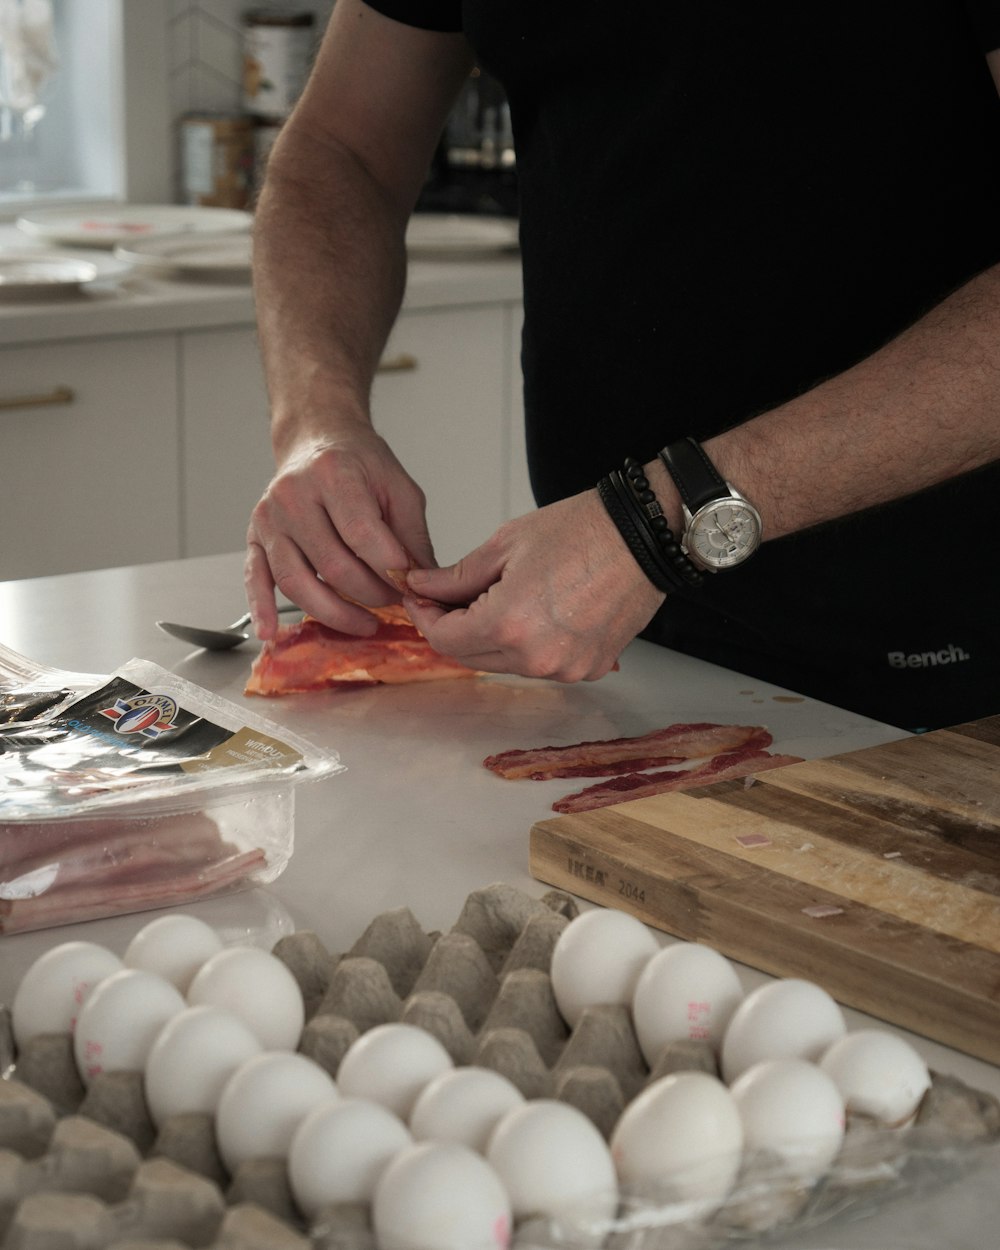 a man is cutting up eggs on a counter